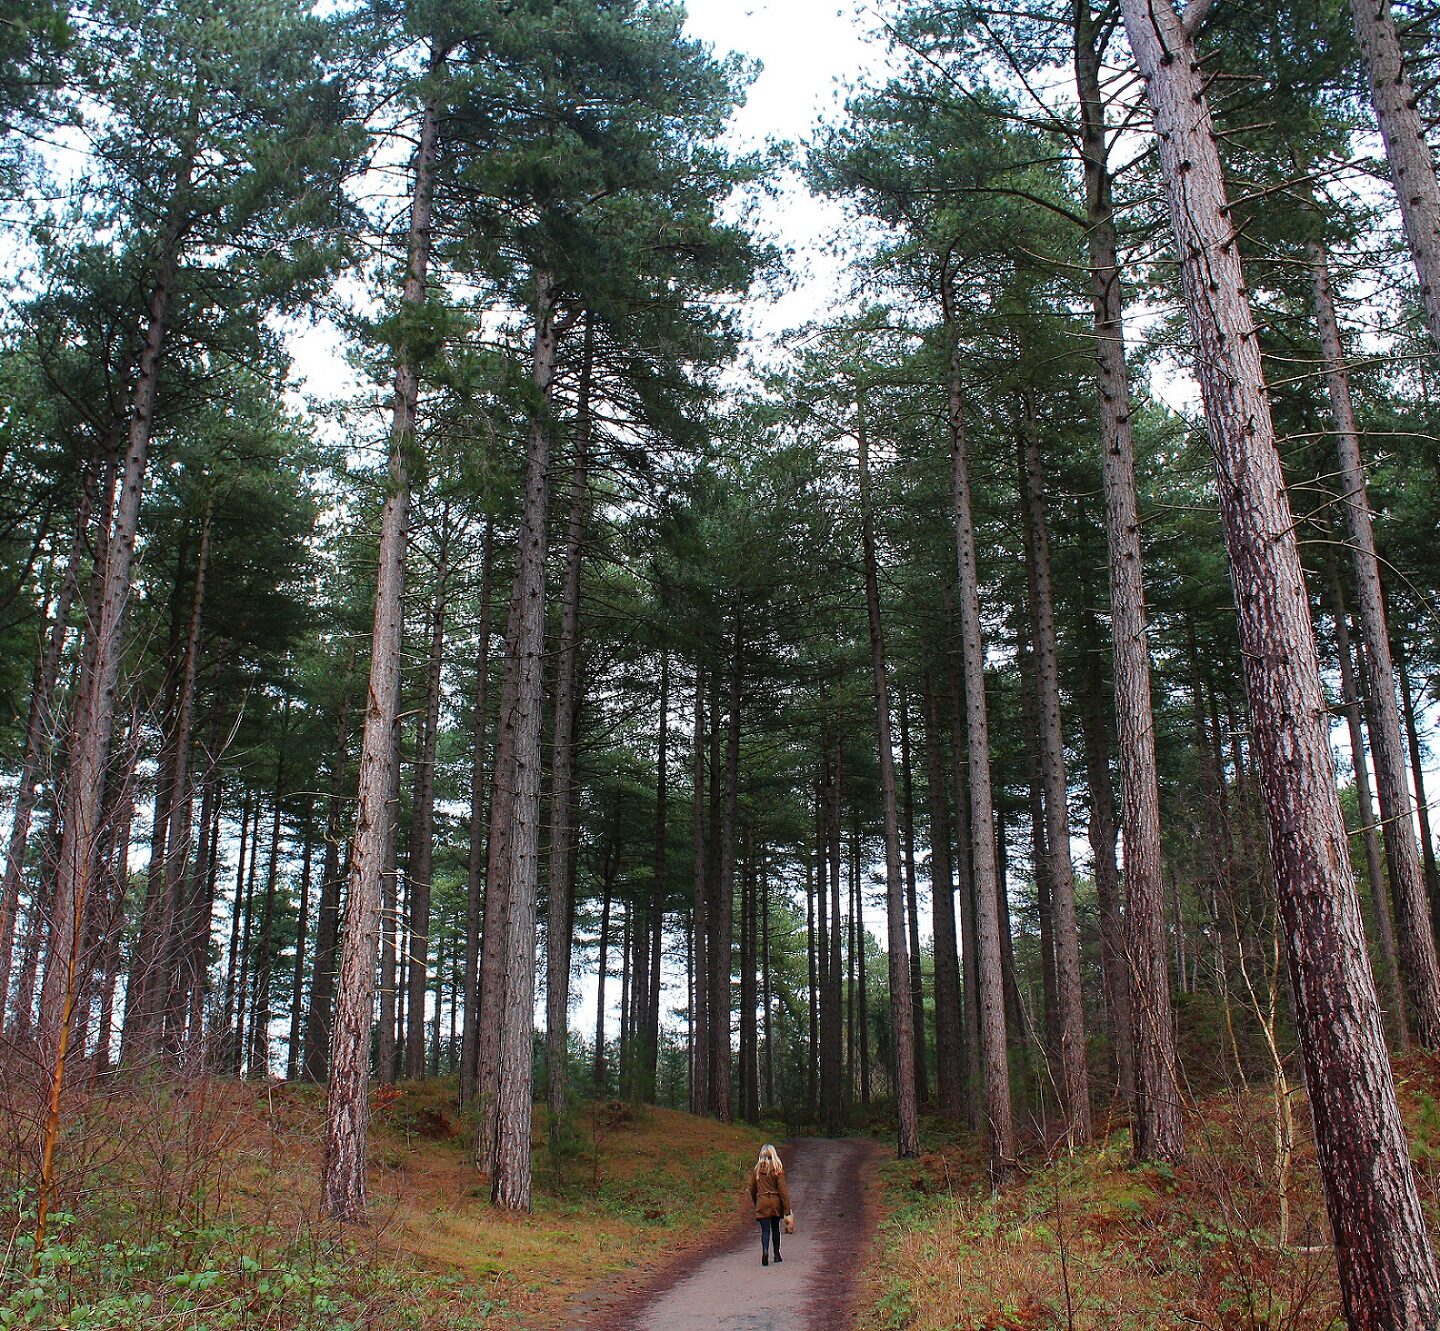 Formby National Trust: An Underrated Outdoor Getaway